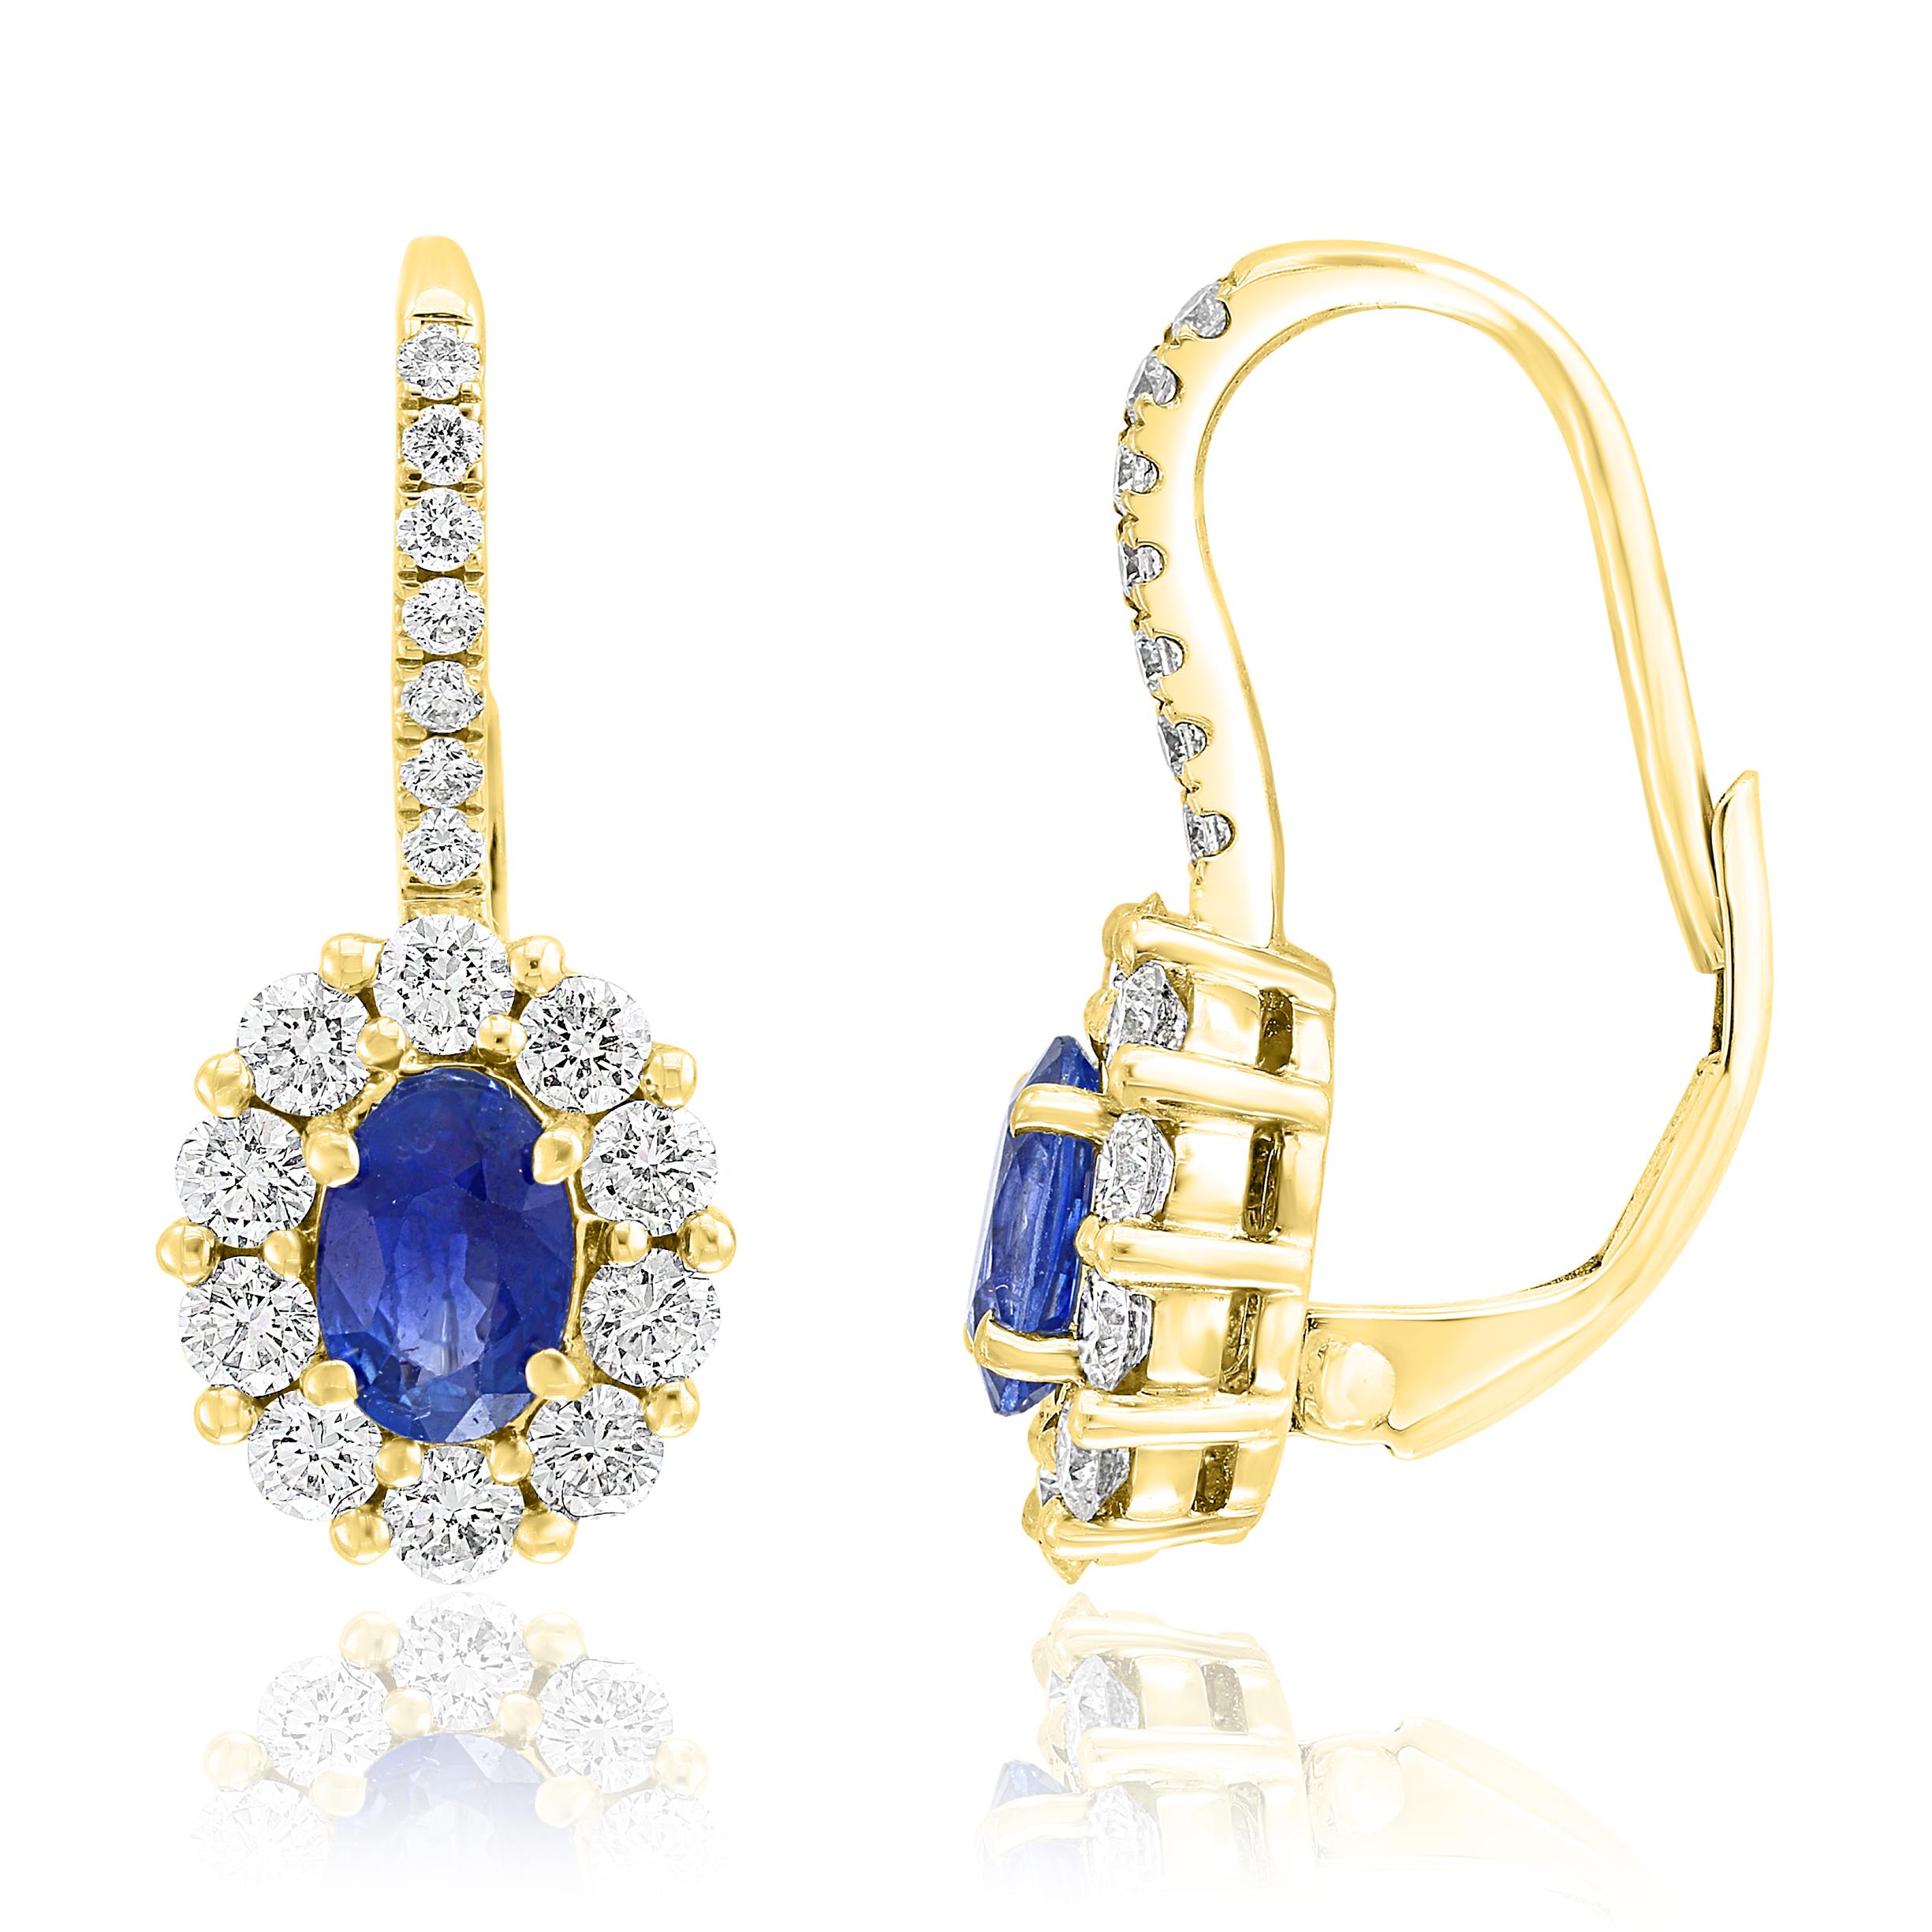 Contemporary 0.88 Carat Oval Cut Blue Sapphire and Diamond Earrings in 18K Yellow Gold For Sale